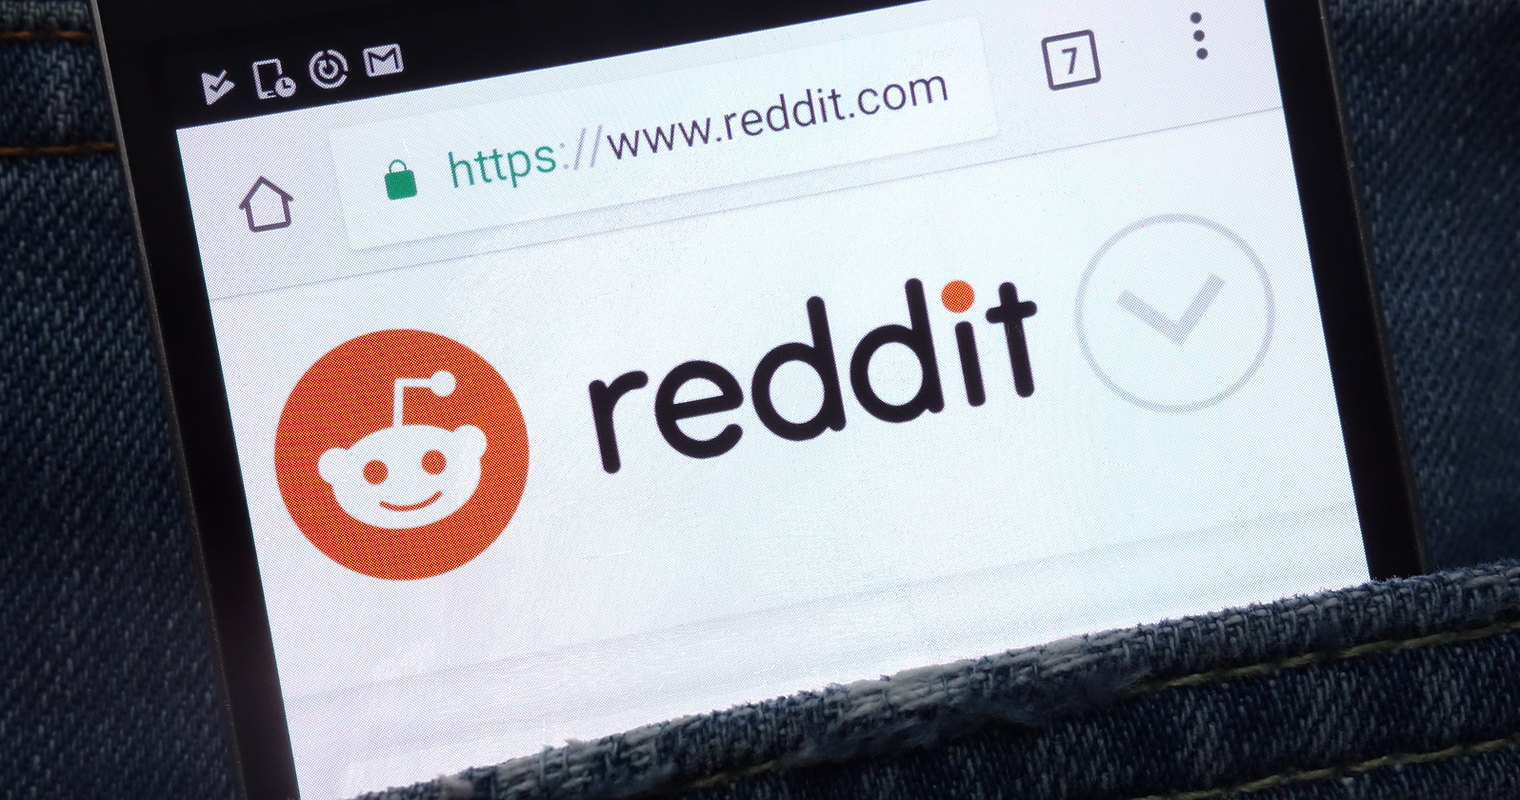 Reddit Announces Inventory Type Options for Advertising